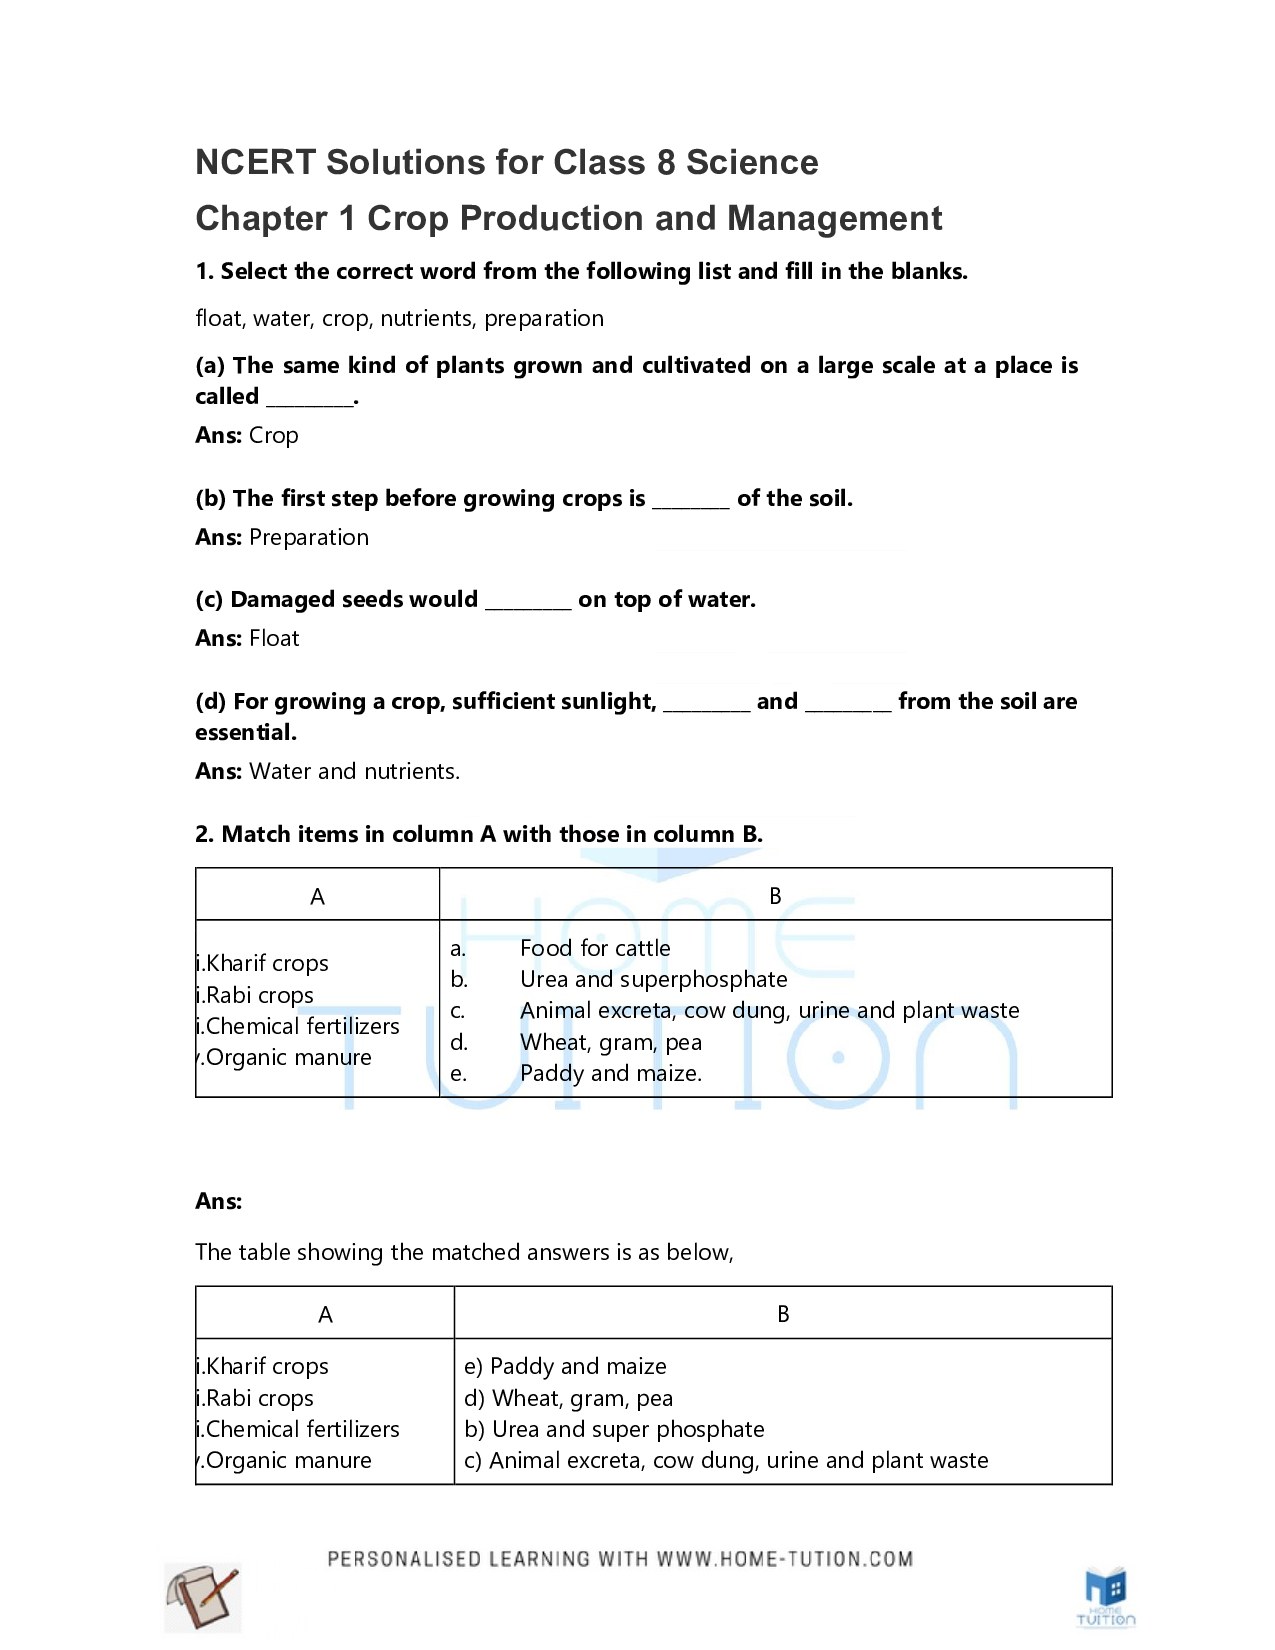 Class 8 Science Chapter 1 Crop Production and Management